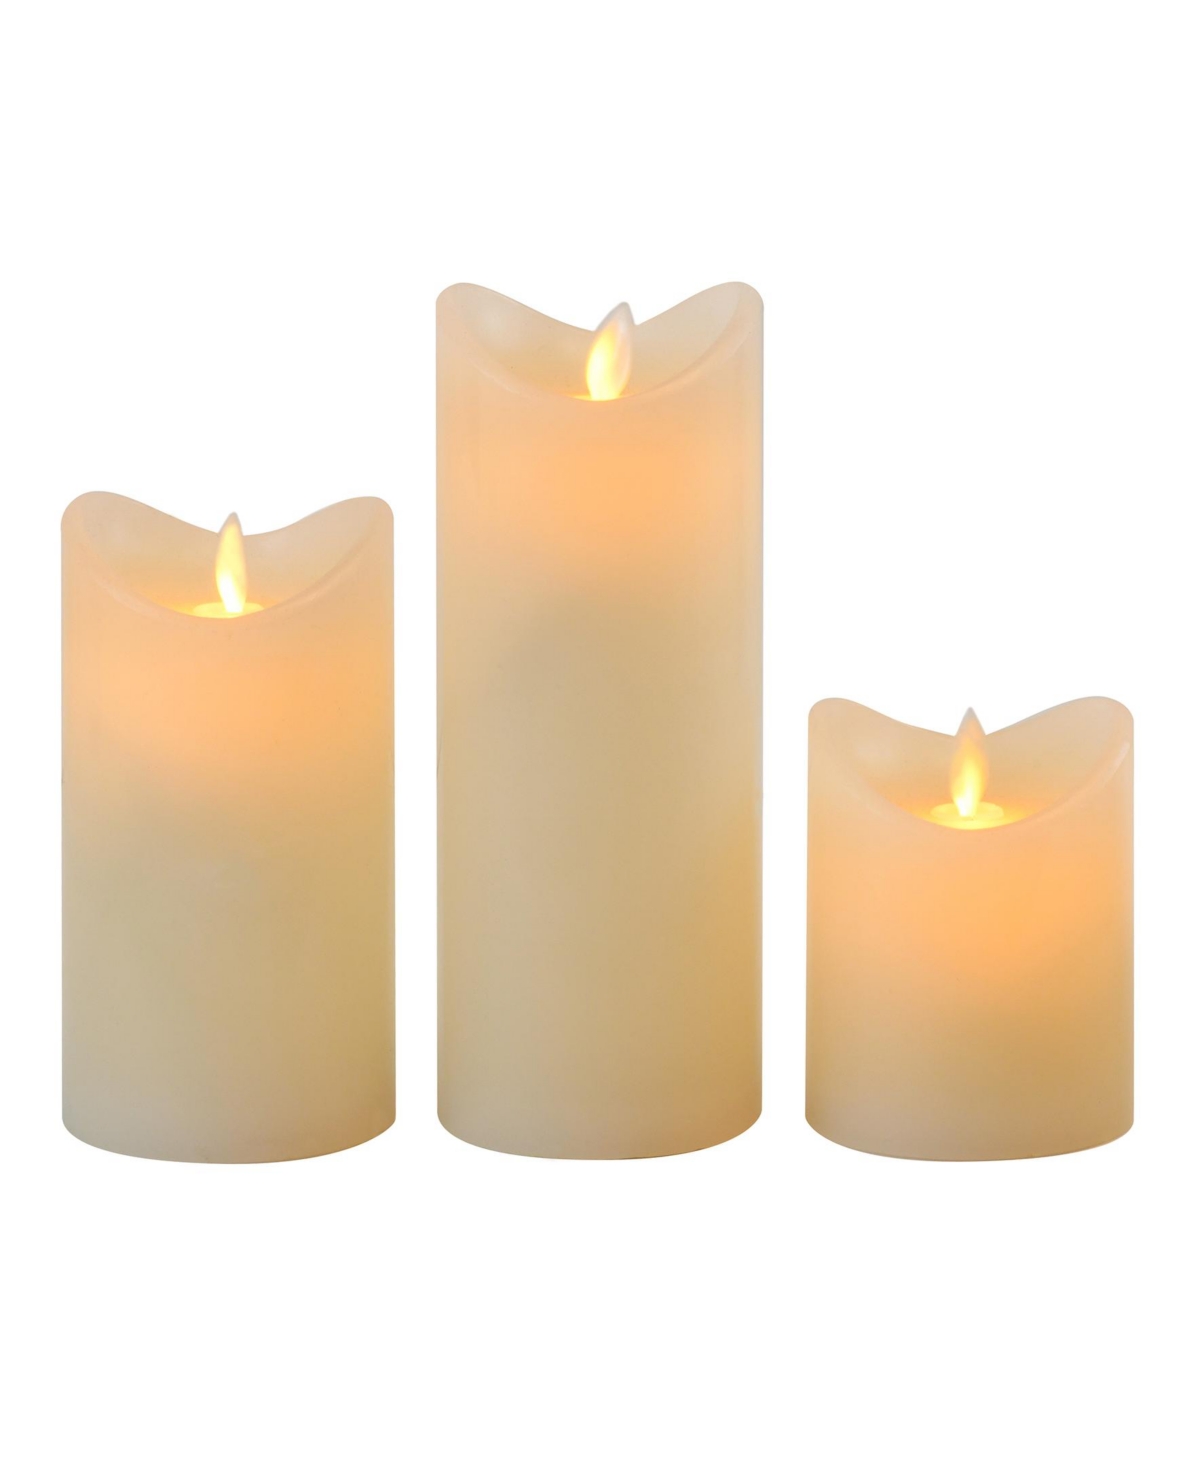 Battery Operated Led Wax Candles with Moving Flame, Set of 3 - Cream